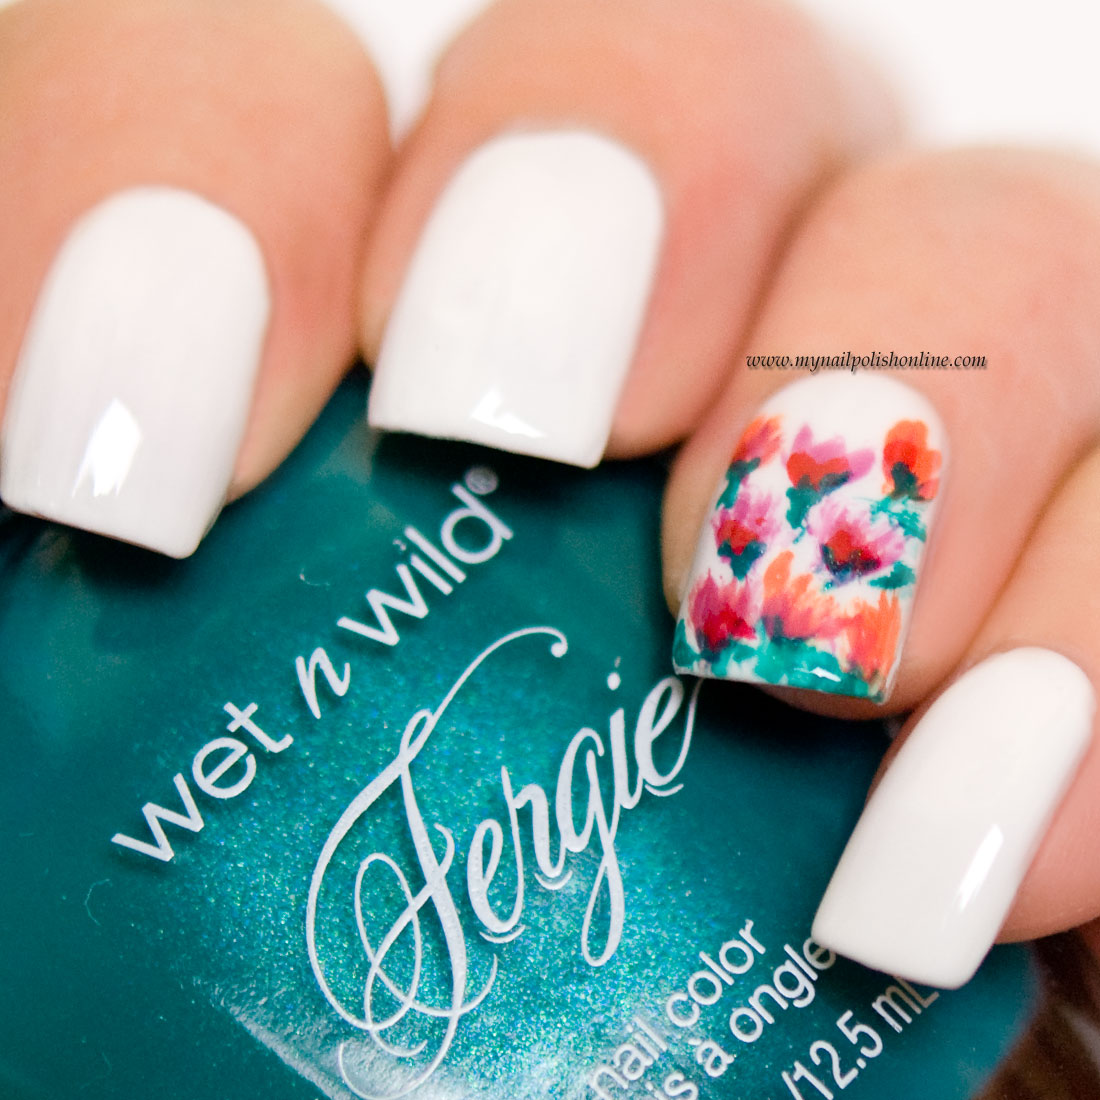 Nail Art - Accent nail with flowers - My Nail Polish Online